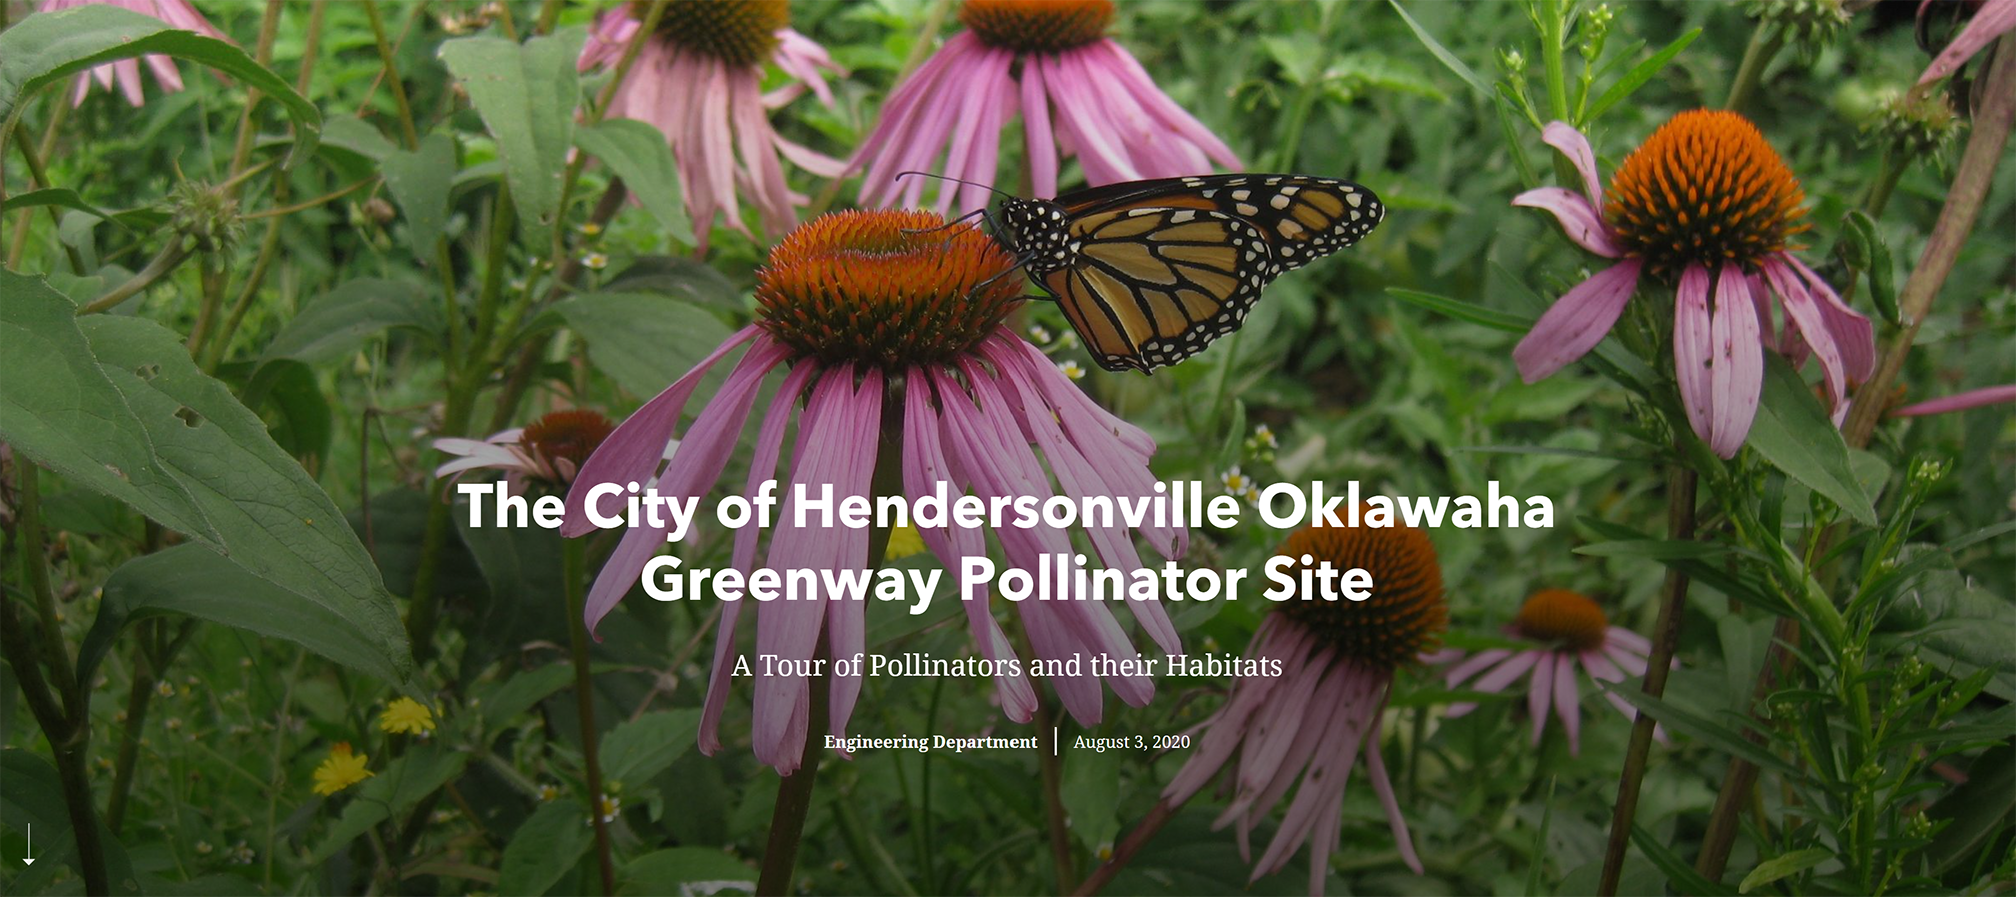 A photo showing purple coneflower plants and orange-and-black monarch butterflies. Across the photo is "The City of Hendersonville Oklawaha Greenway Pollinator Site"